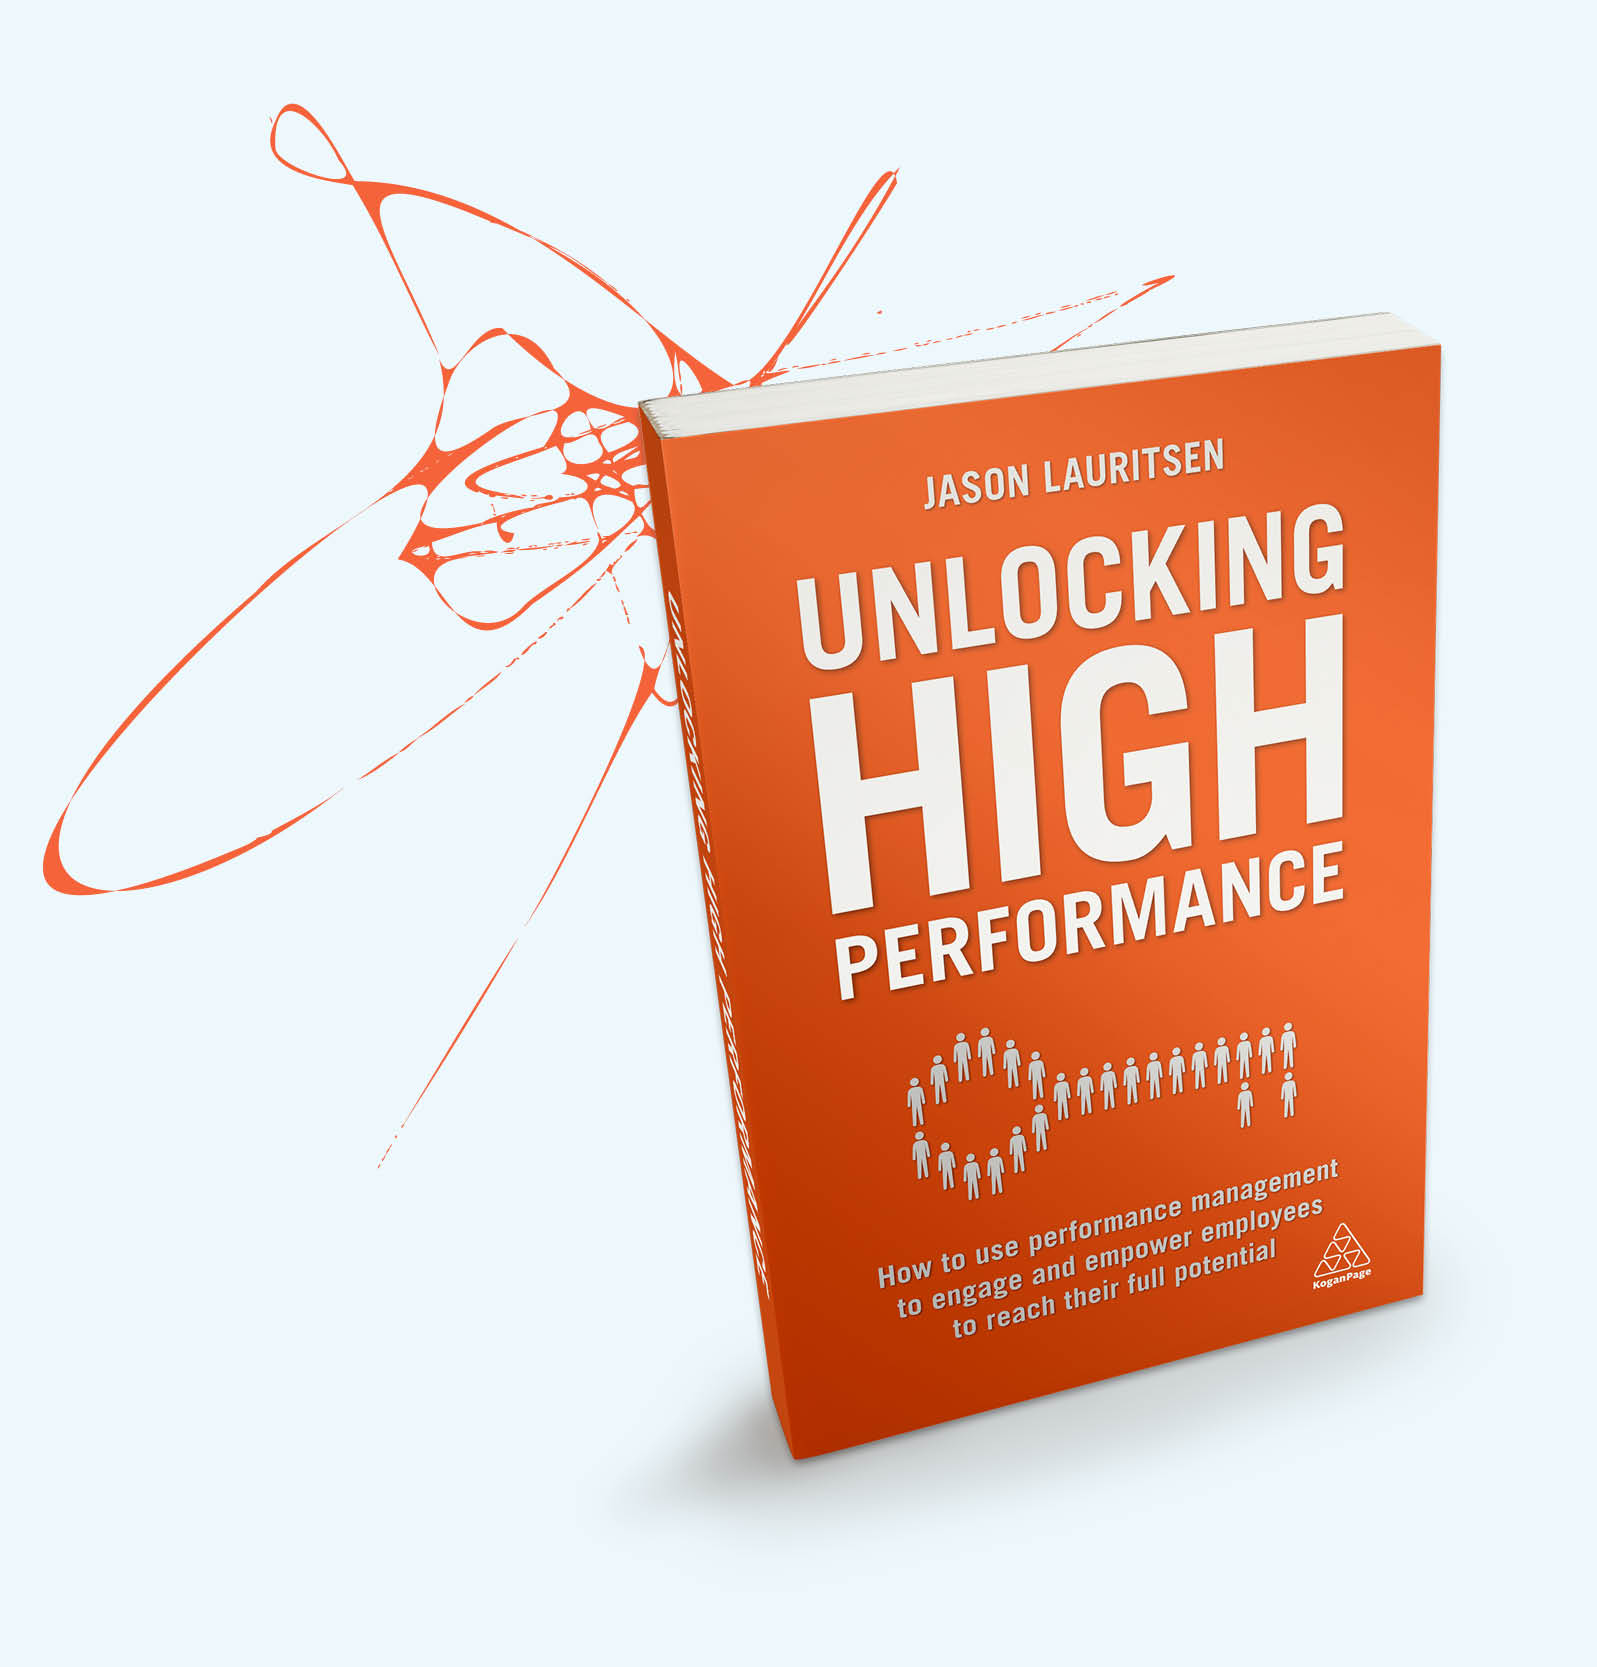 Unlocking High Performance by Jason Lauritsen book cover